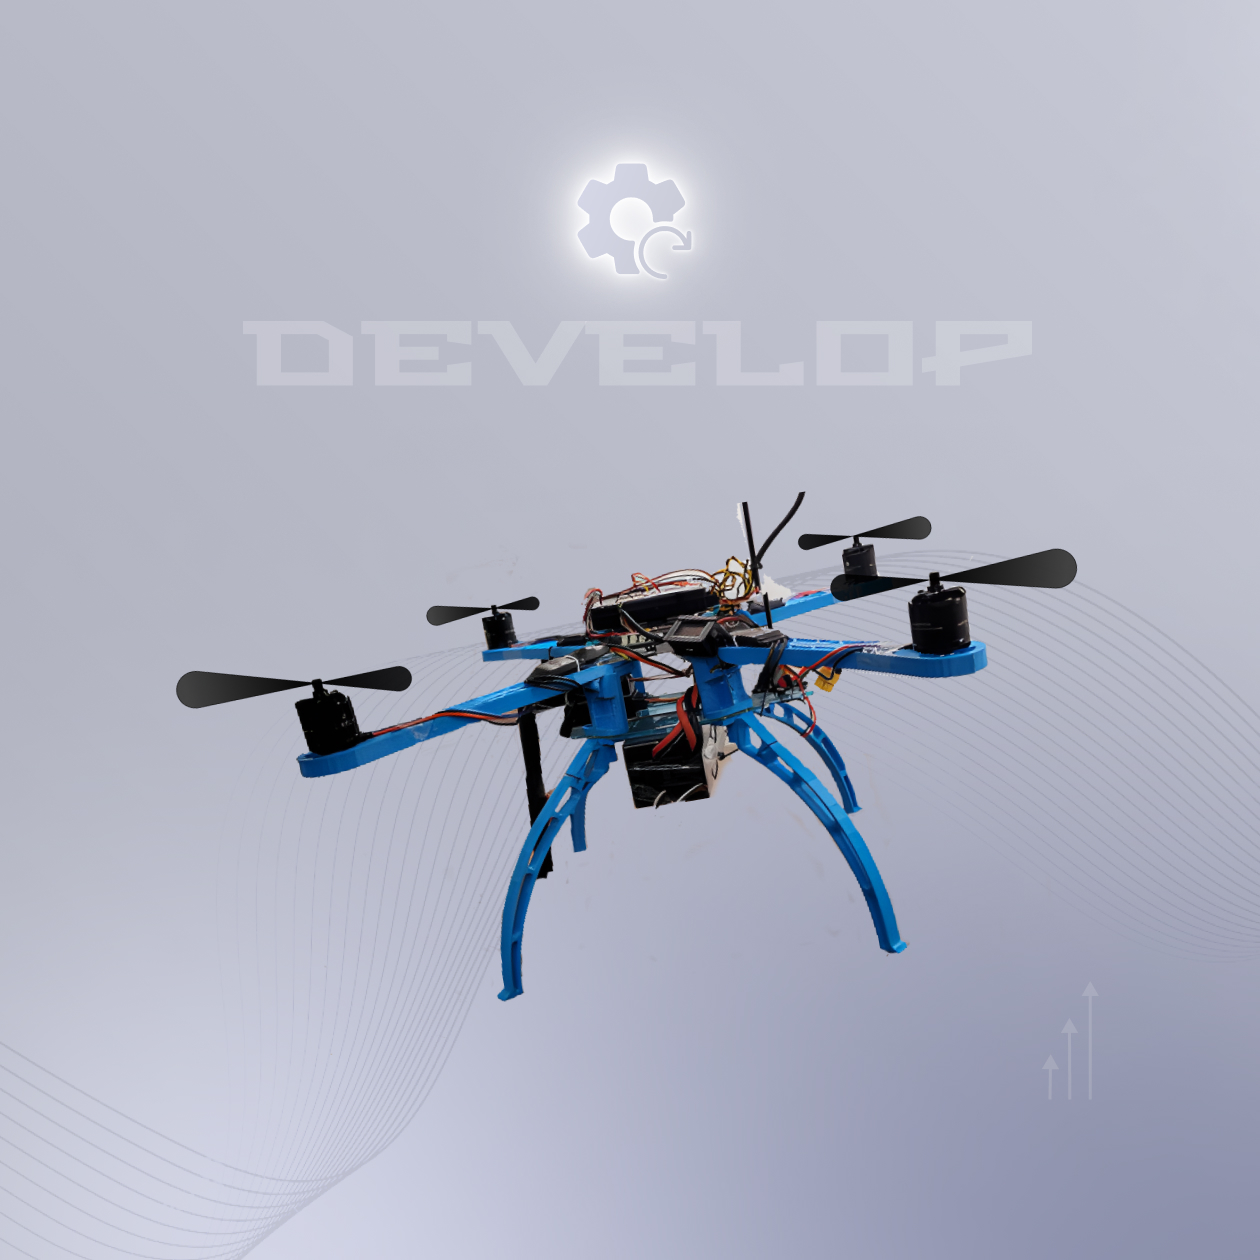 The benefits of a quadcopter from Gec Engineering for quality filming.